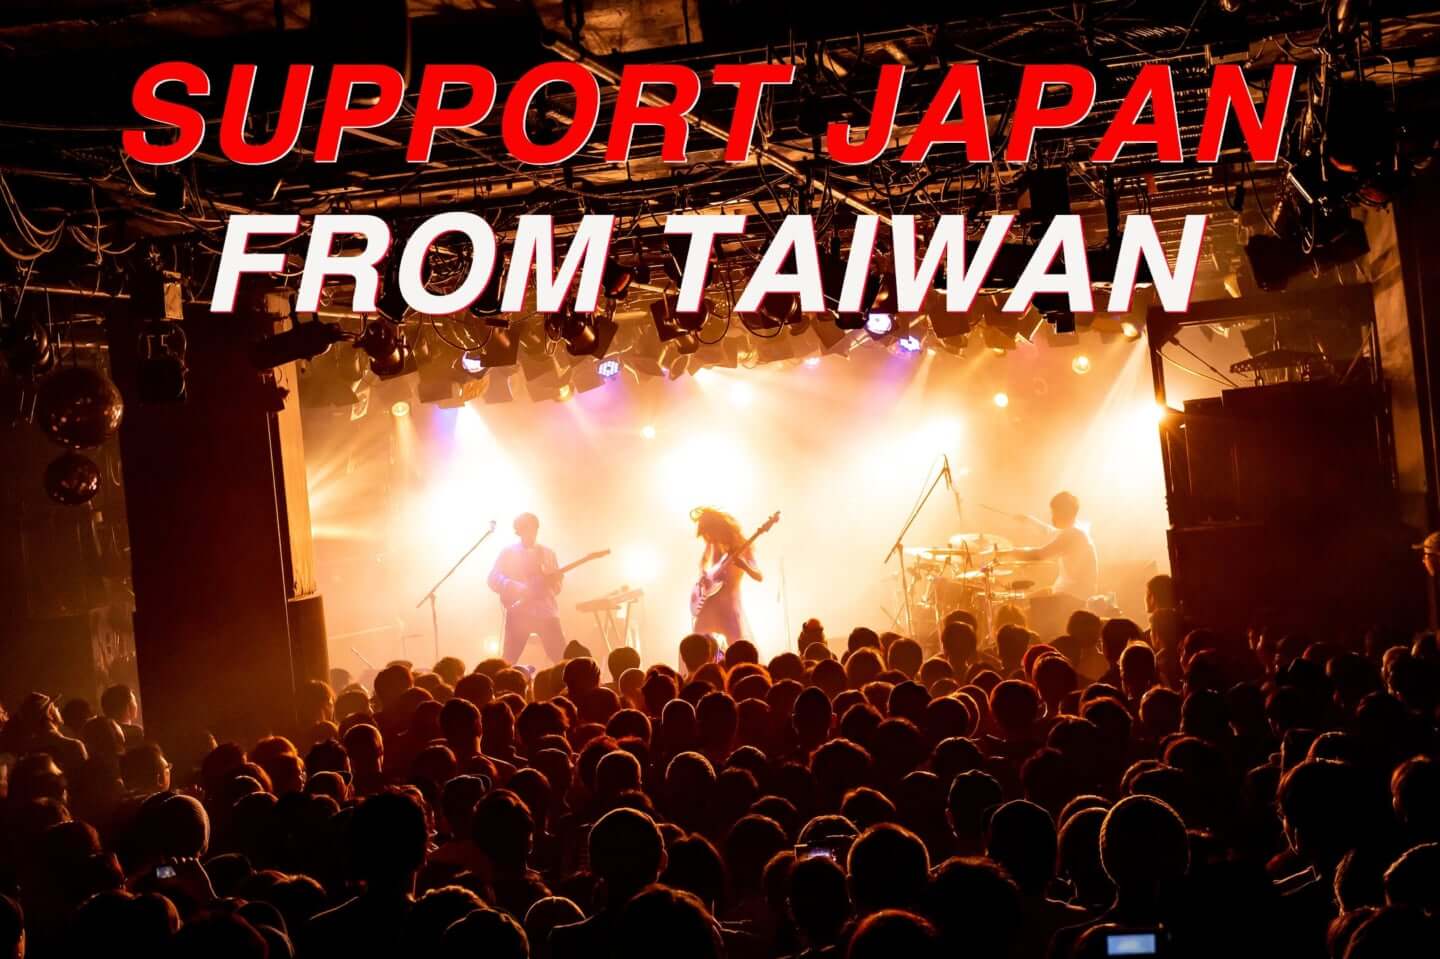 SUPPORT JAPAN FROM TAIWAN